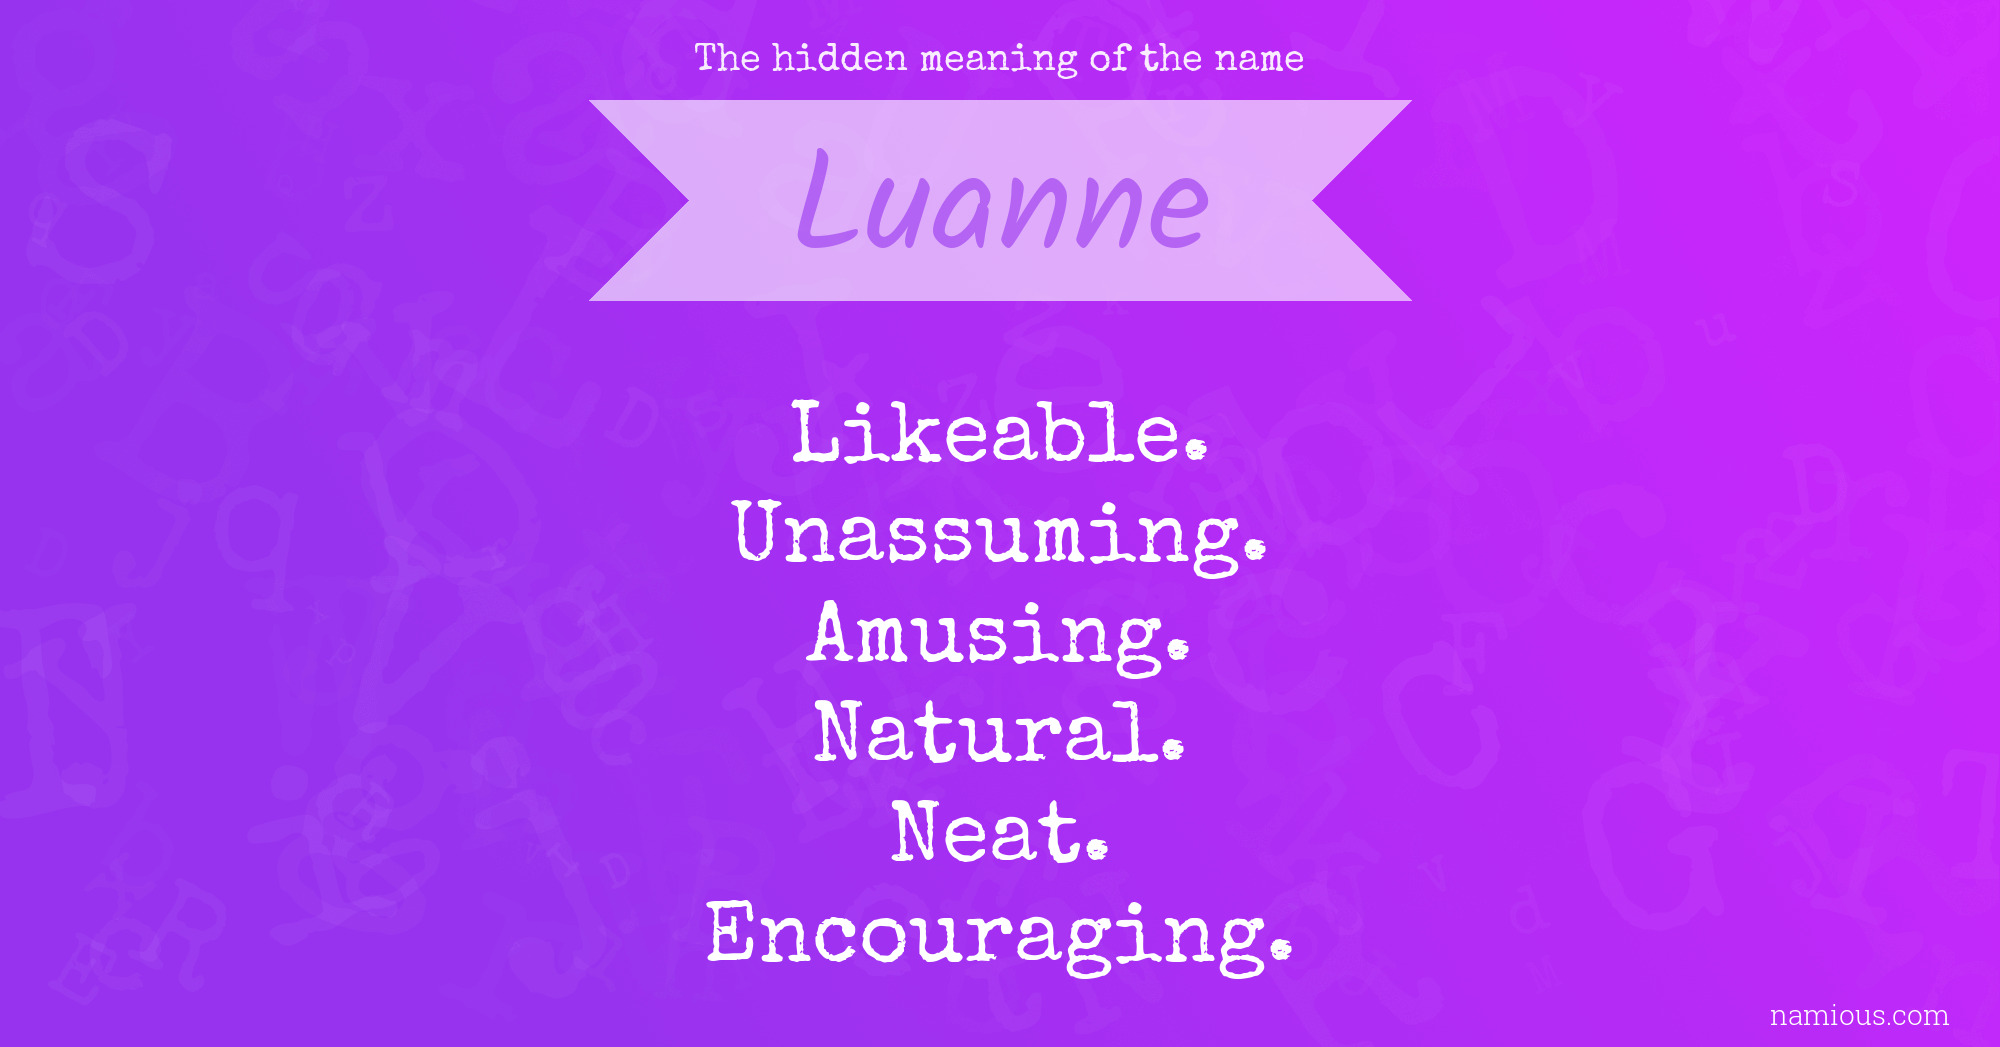 The hidden meaning of the name Luanne